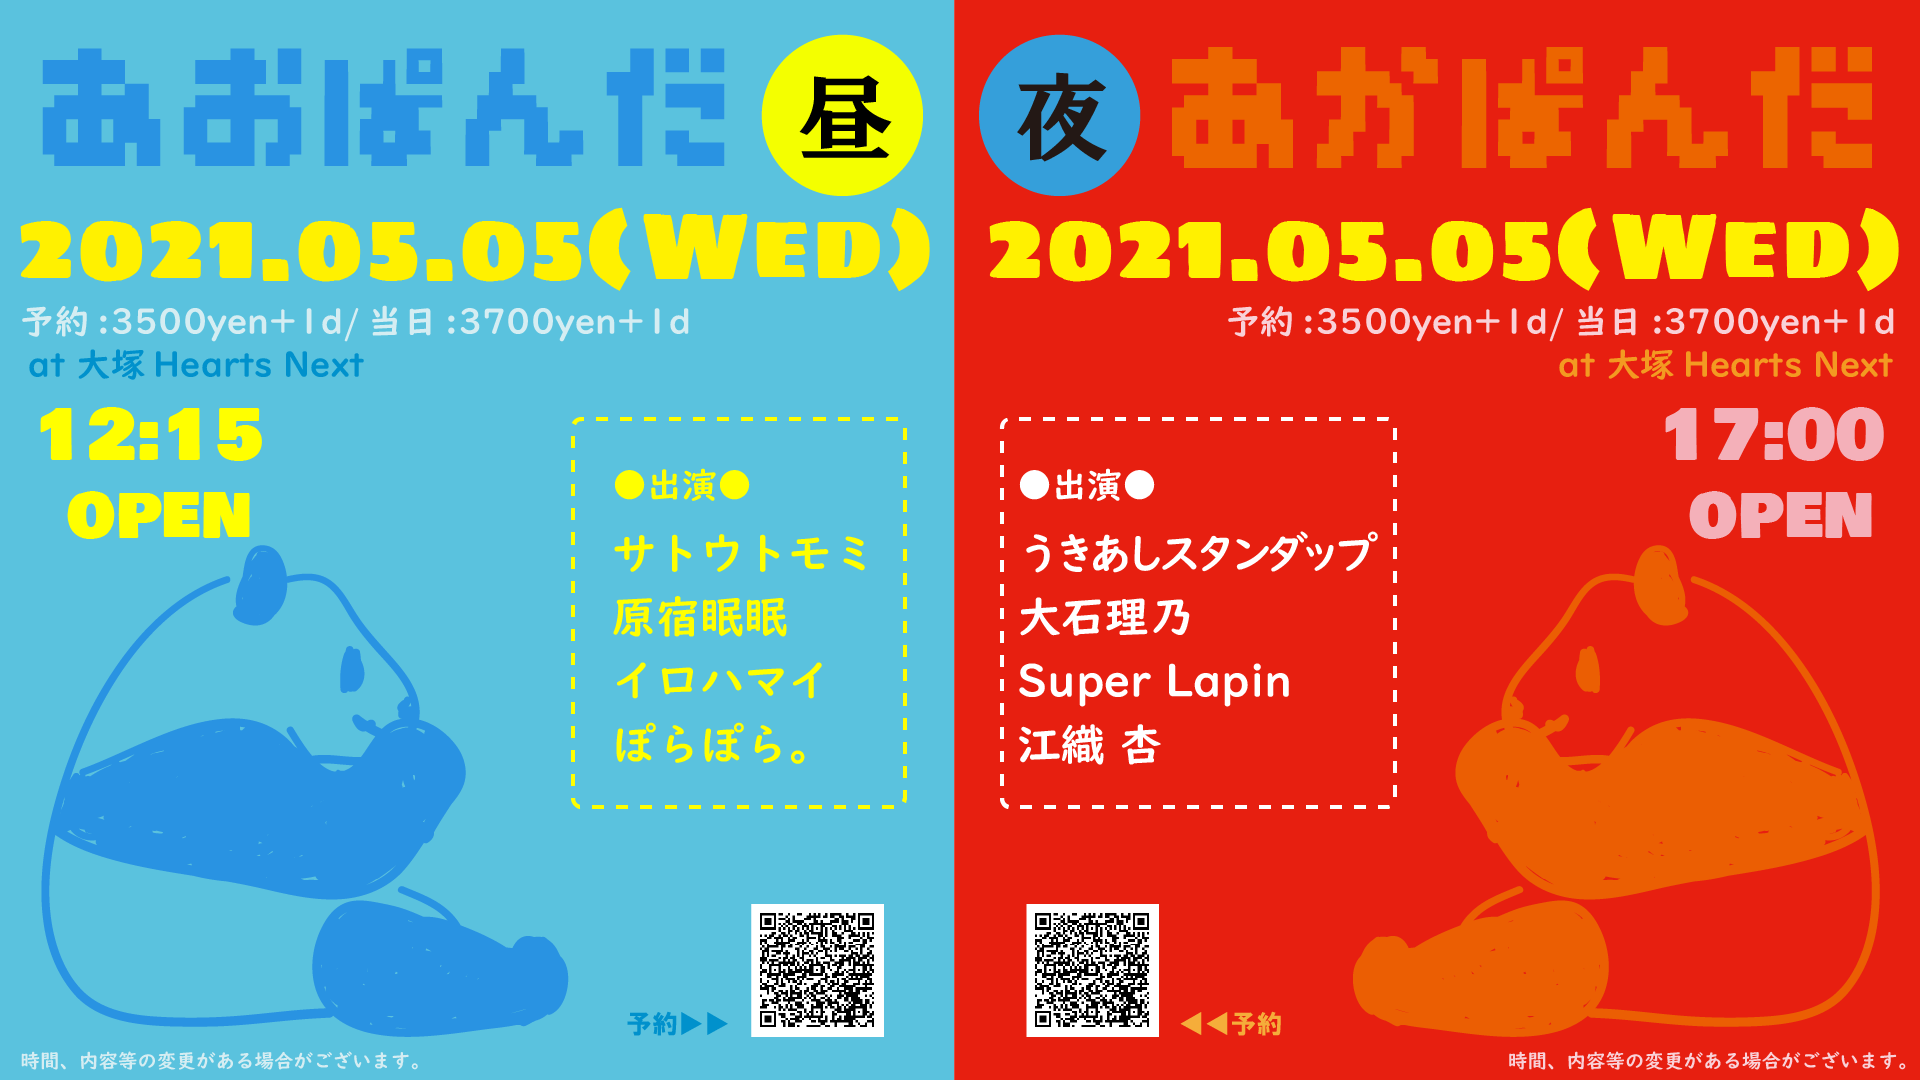 20210505_flyer1.png